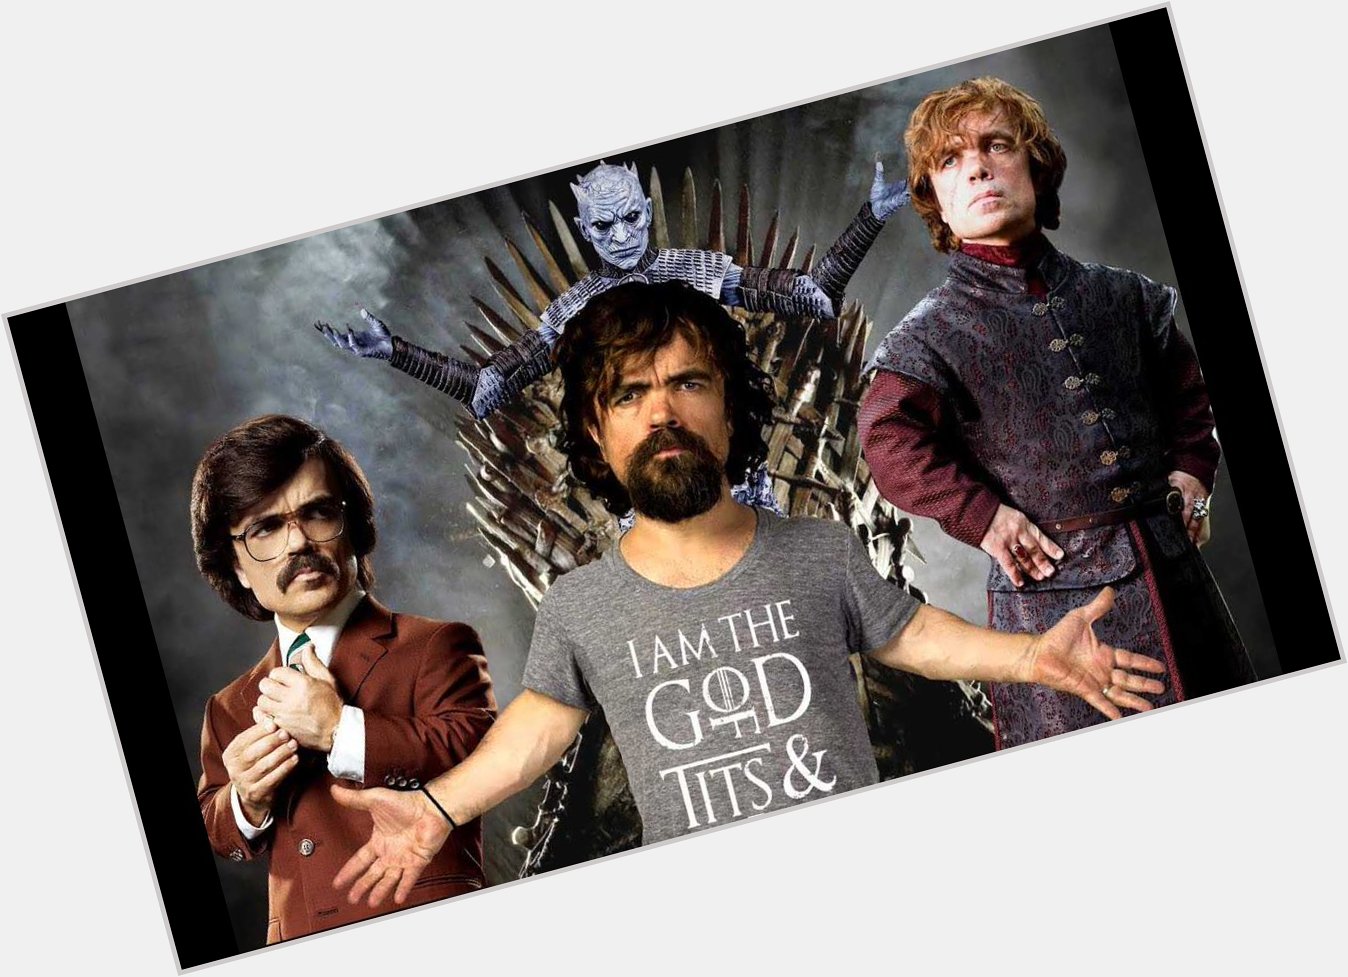 Happy 52nd birthday to Peter Dinklage! 